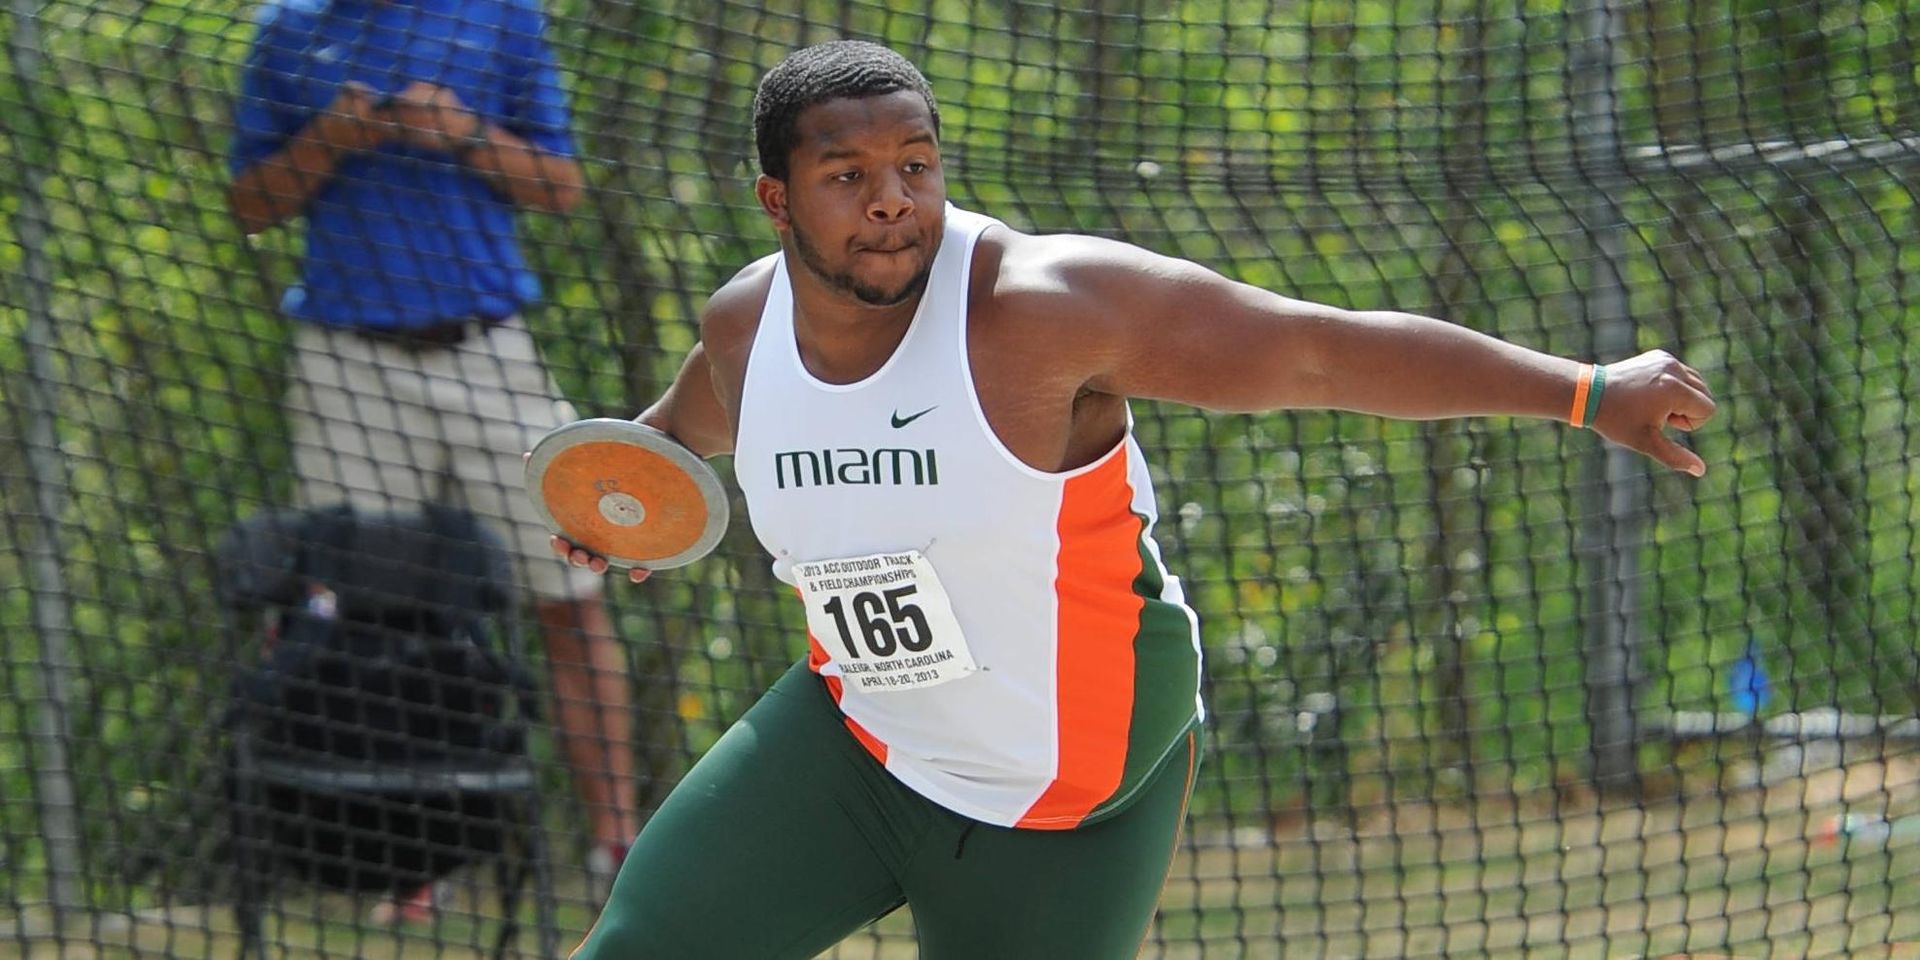 Canes Track Wins on Day 2 at Penn Relays